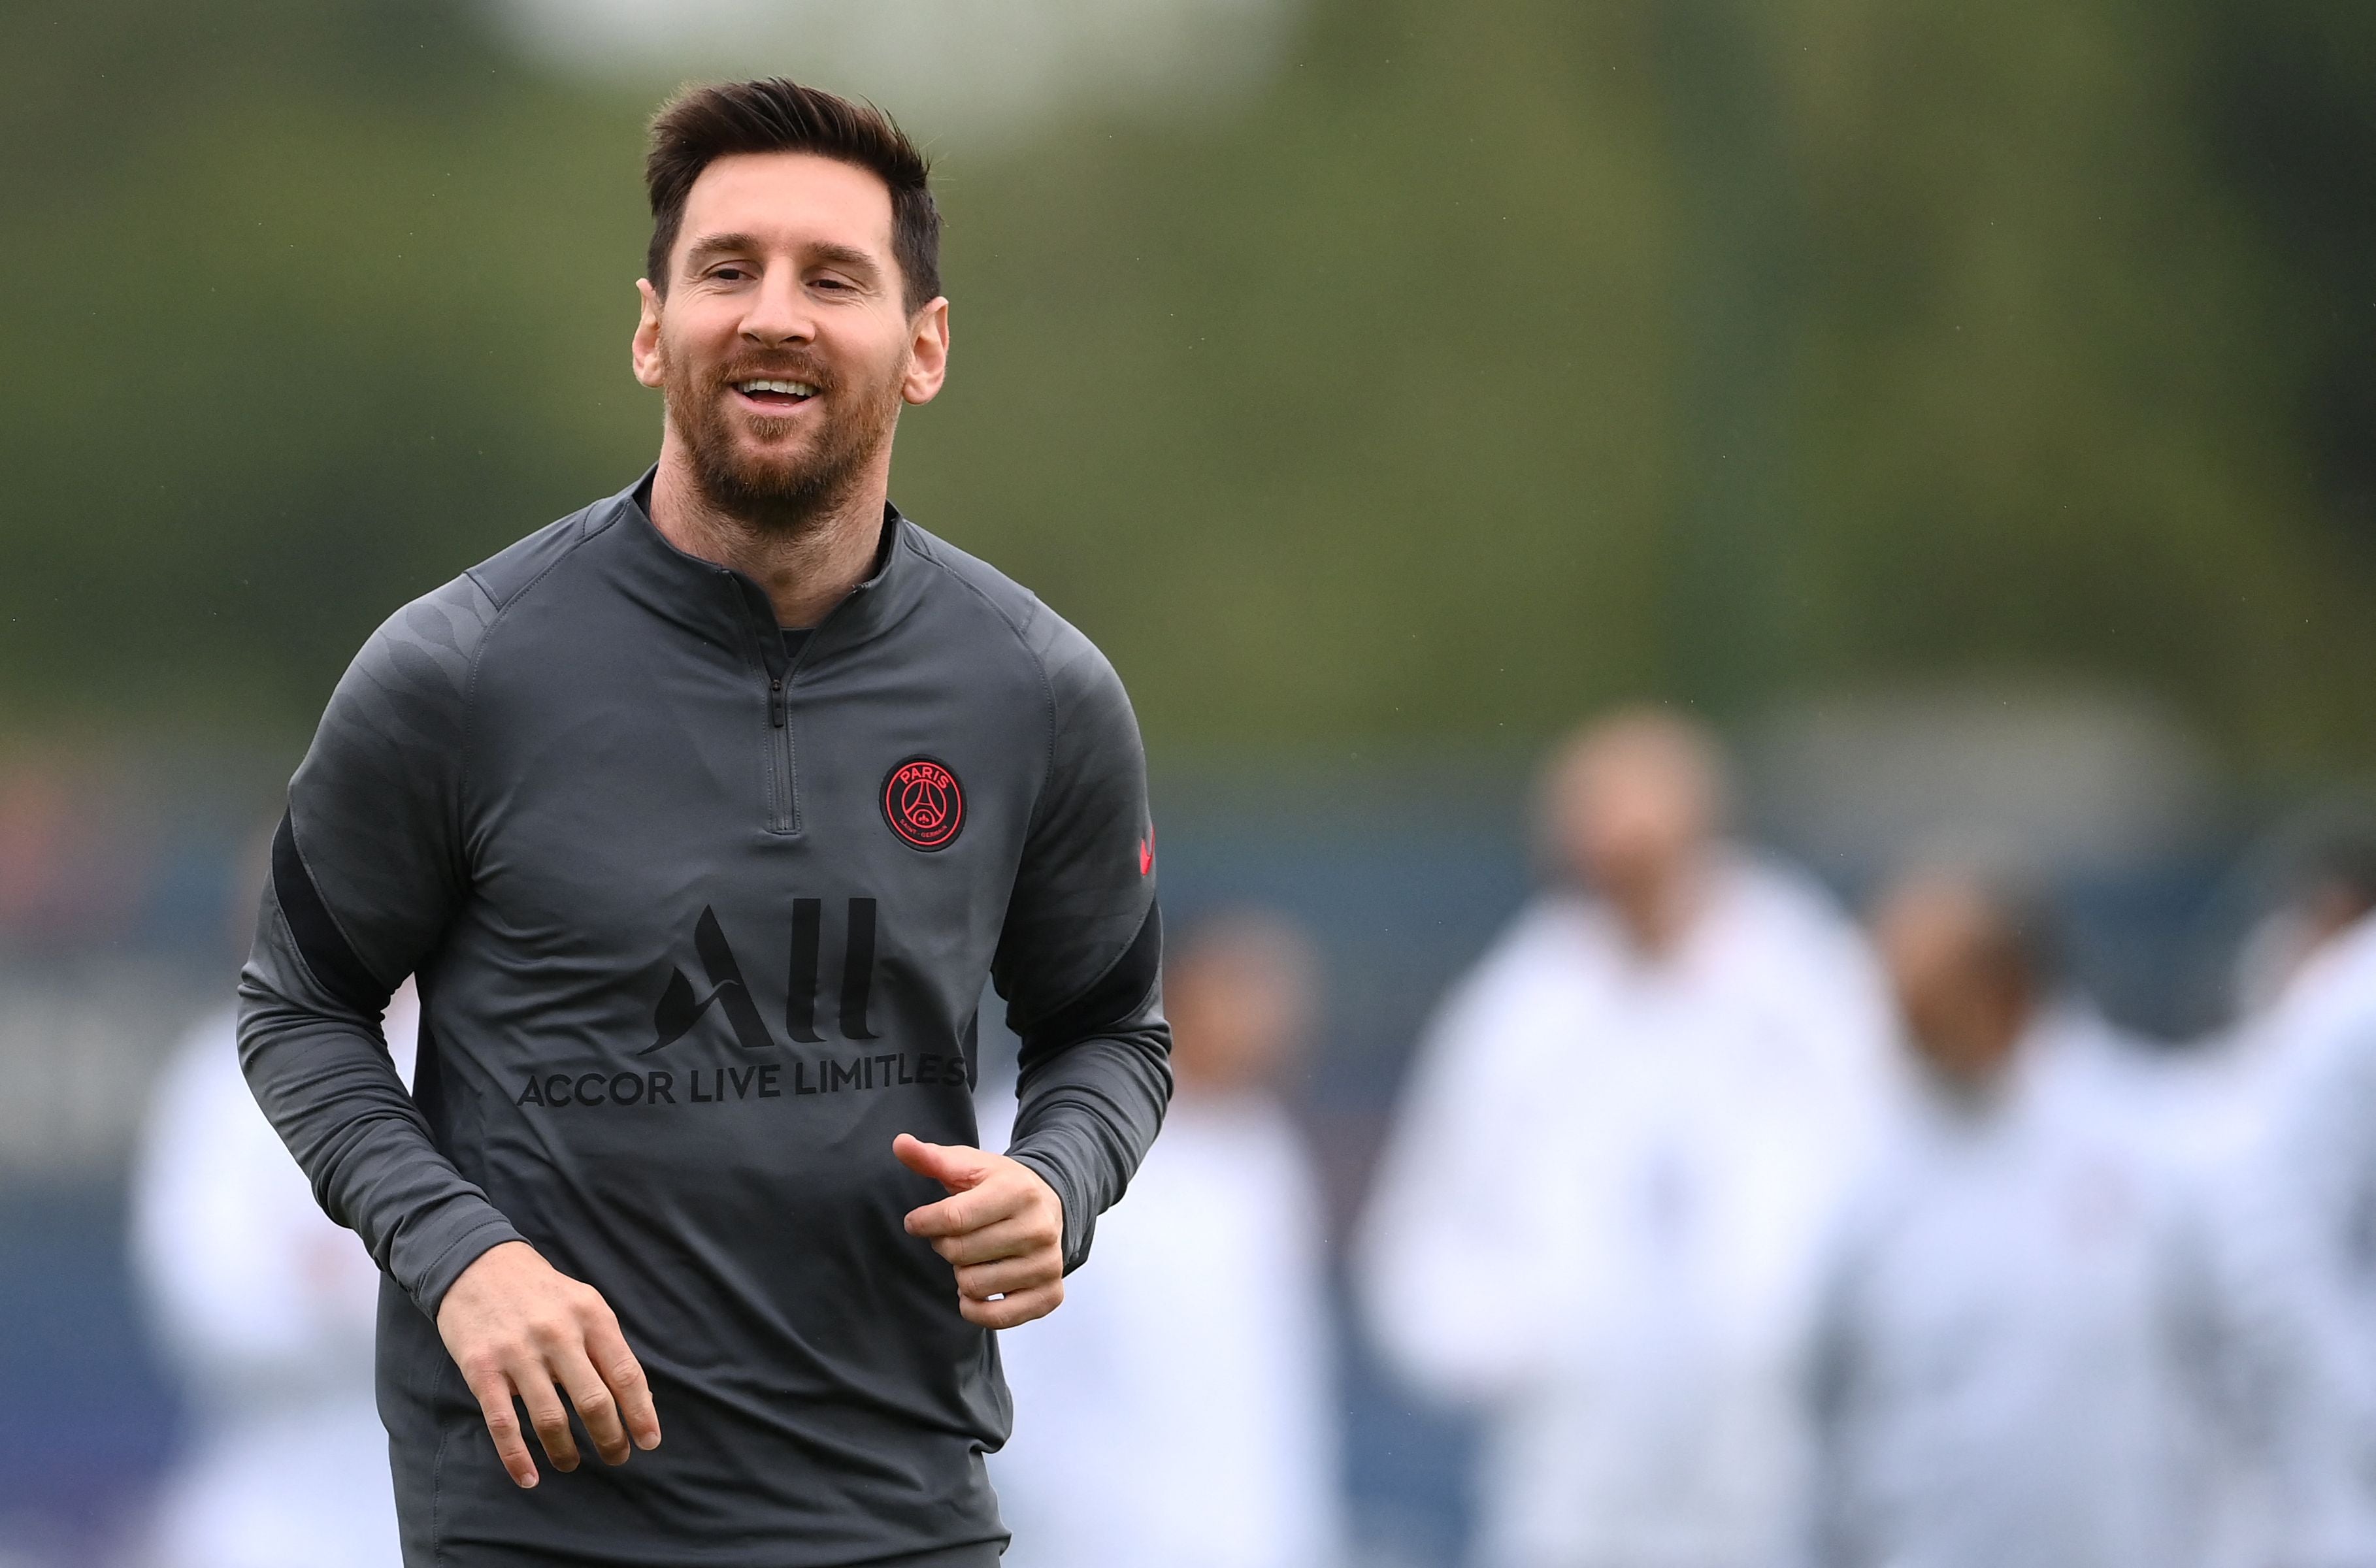 Lionel Messi in an injury doubt ahead of PSG’s match against City